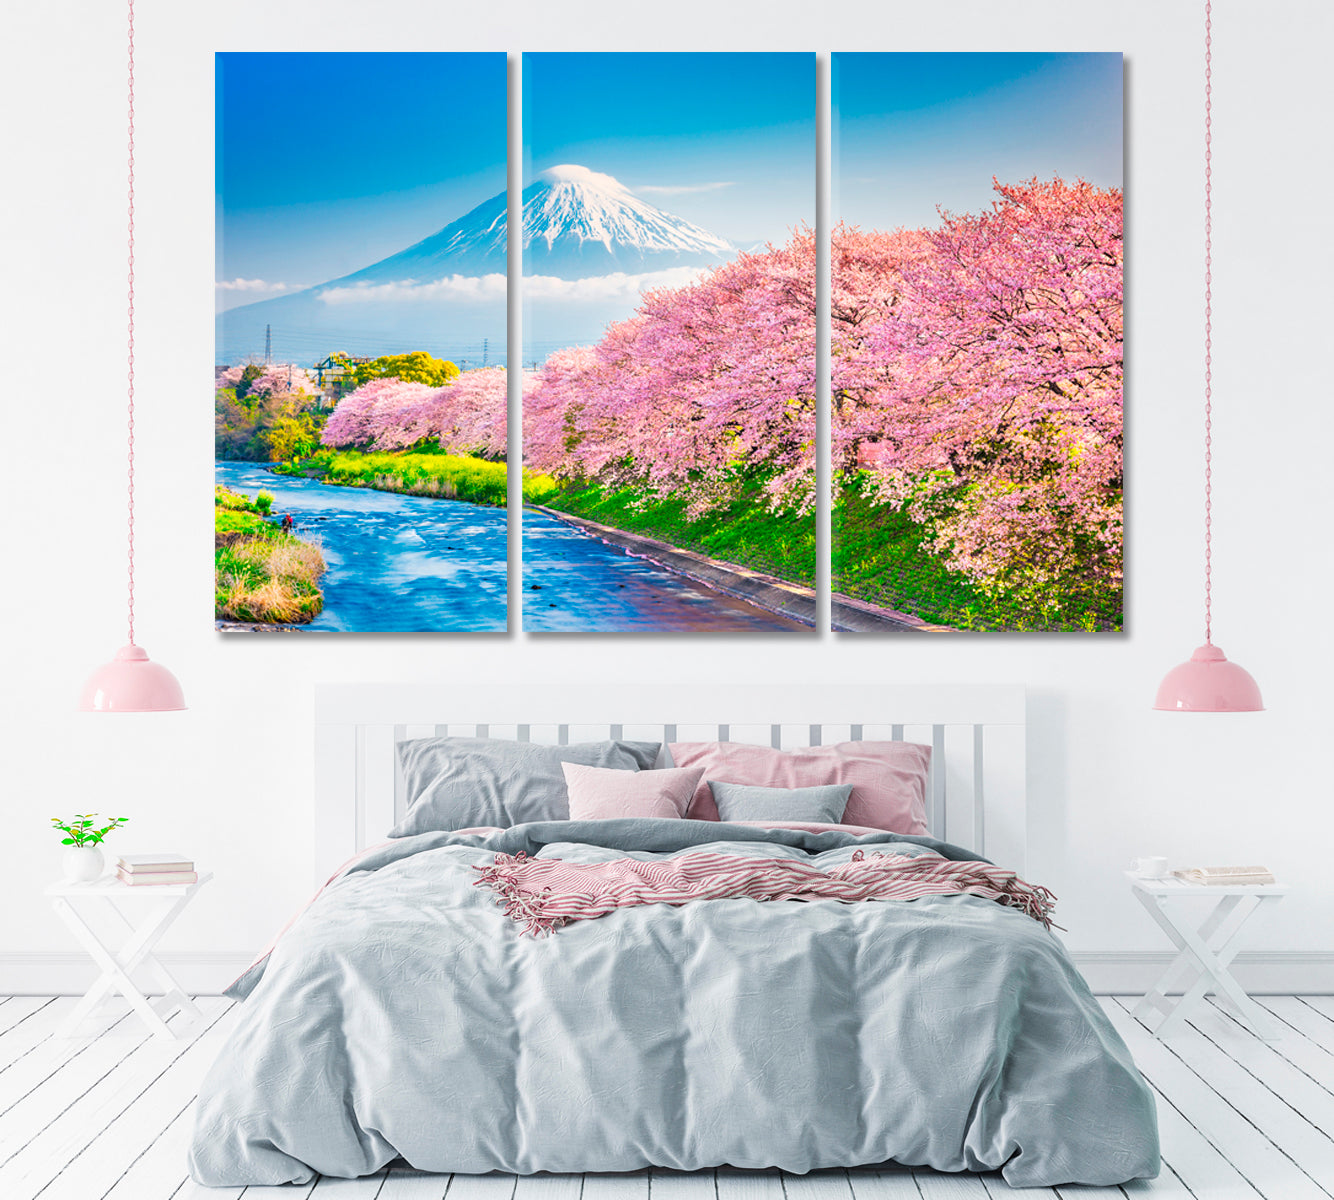 Mount Fuji with Cherry Blossoms Japan Canvas Print ArtLexy 3 Panels 36"x24" inches 